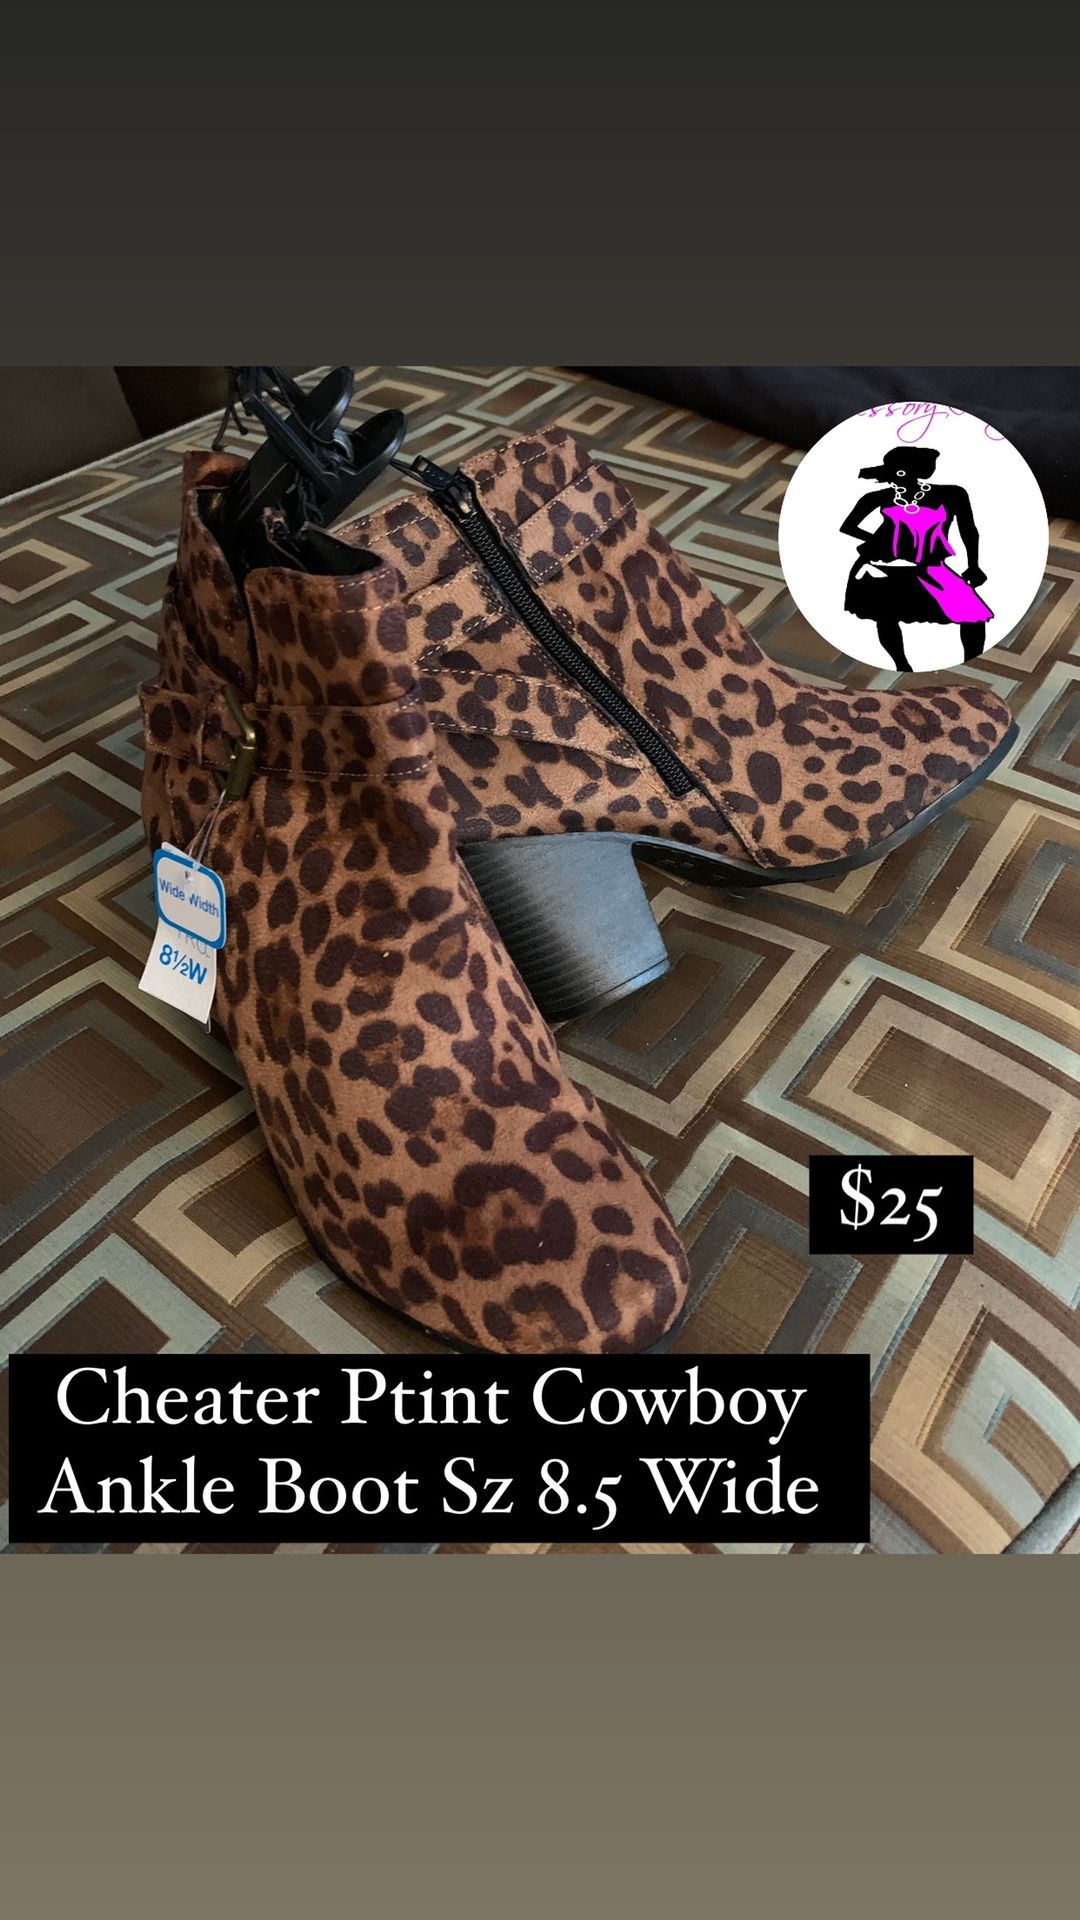 Cheater Print Cowboy Ankle Boots 